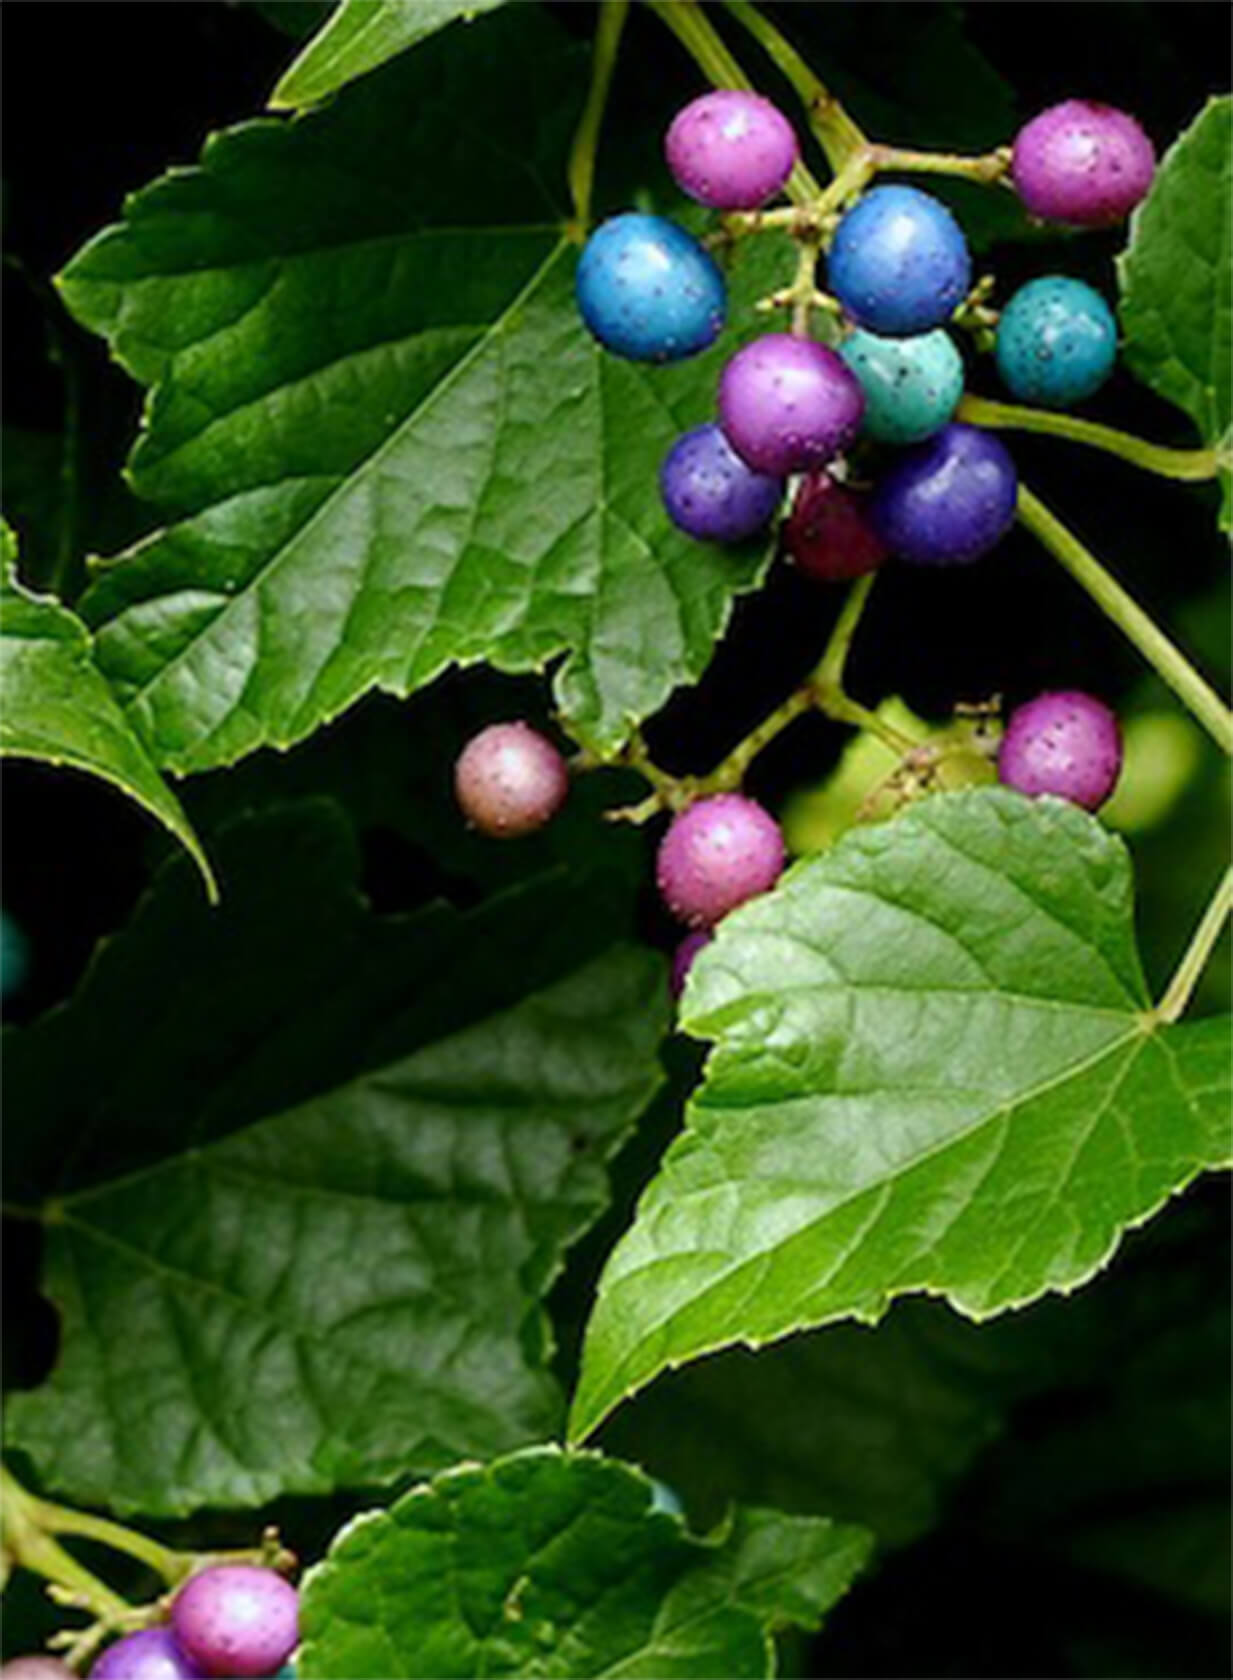 Porcelain Berry may be pretty